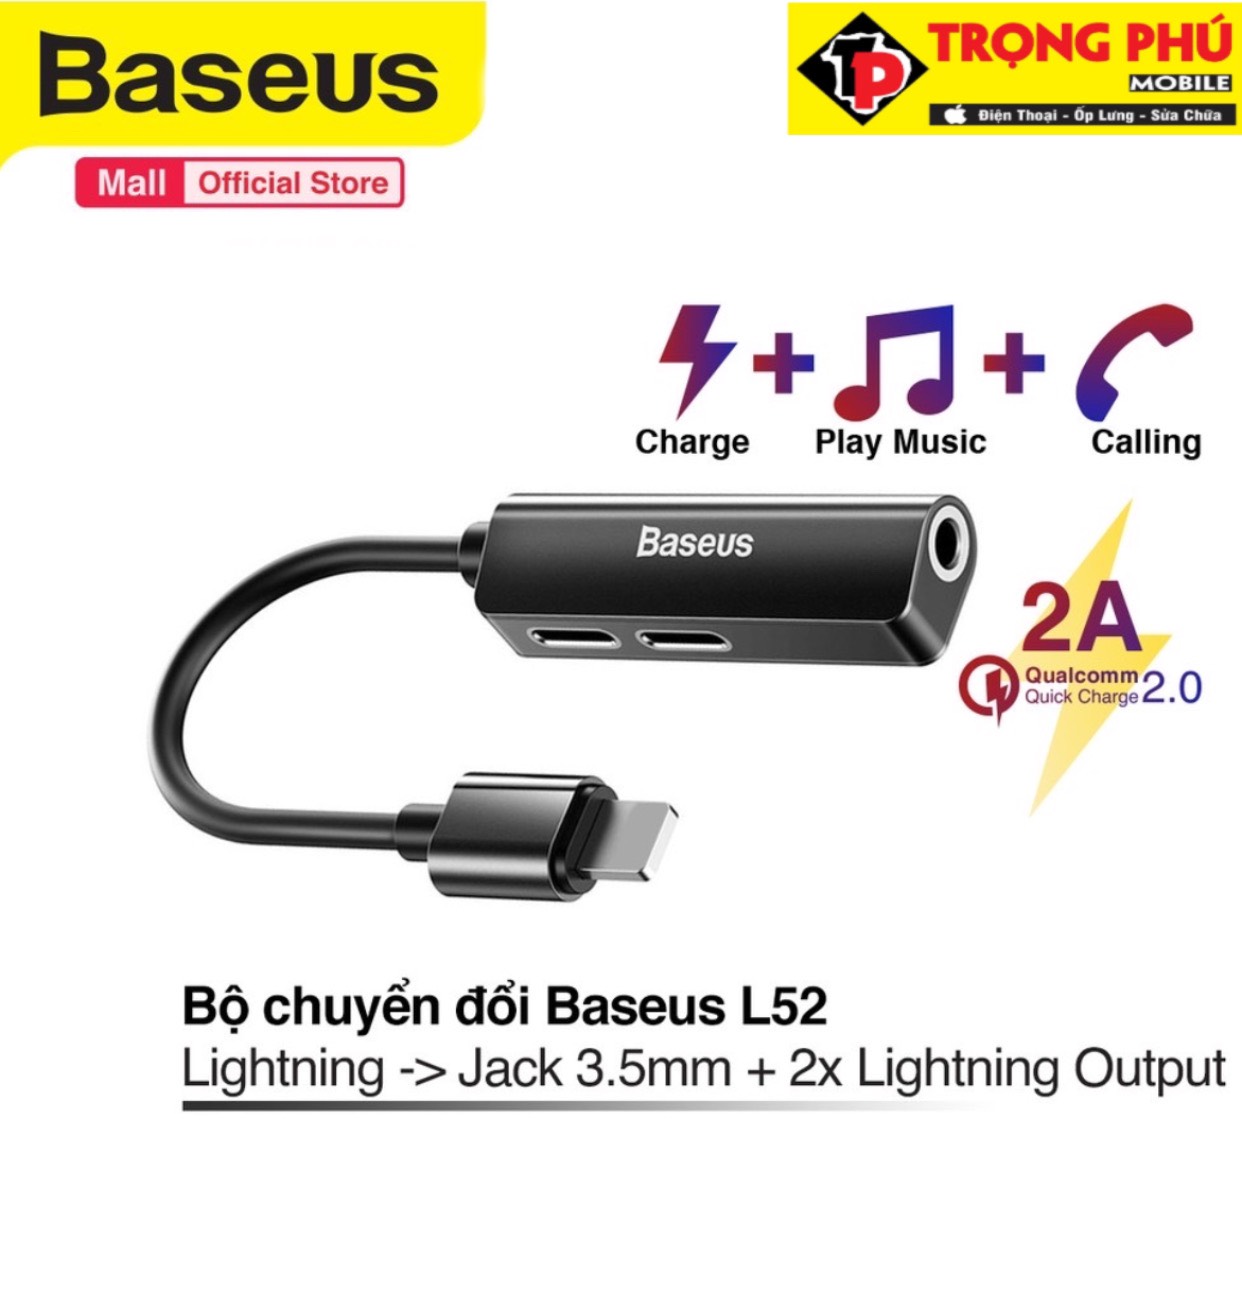 Cáp chuyển Baseus 3-in-1 iphone to Dual iP & 3.5mm L52